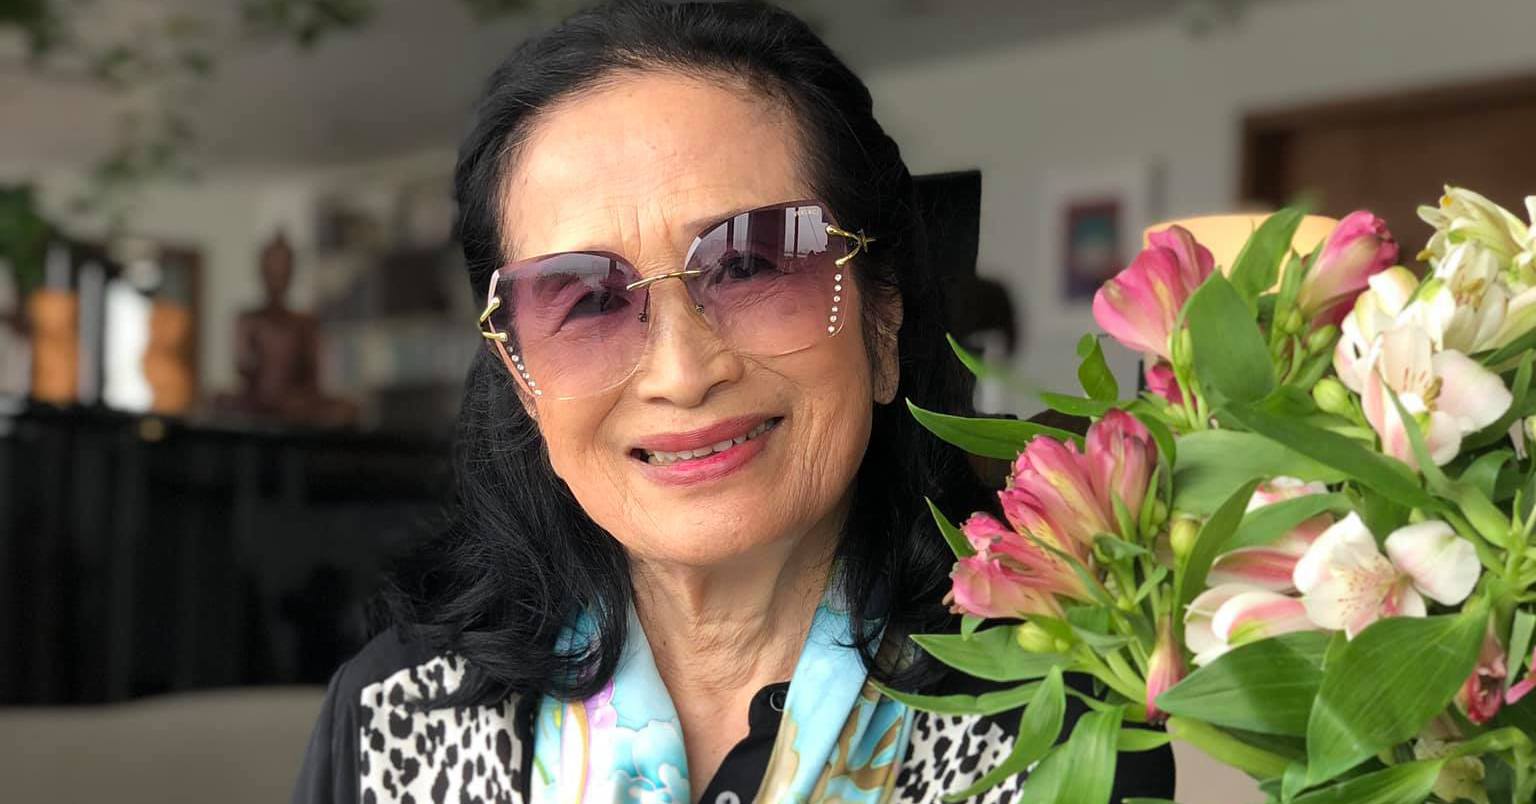 People’s Artist Tra Giang reveals life at the age of 80, the biggest cherished life in the world